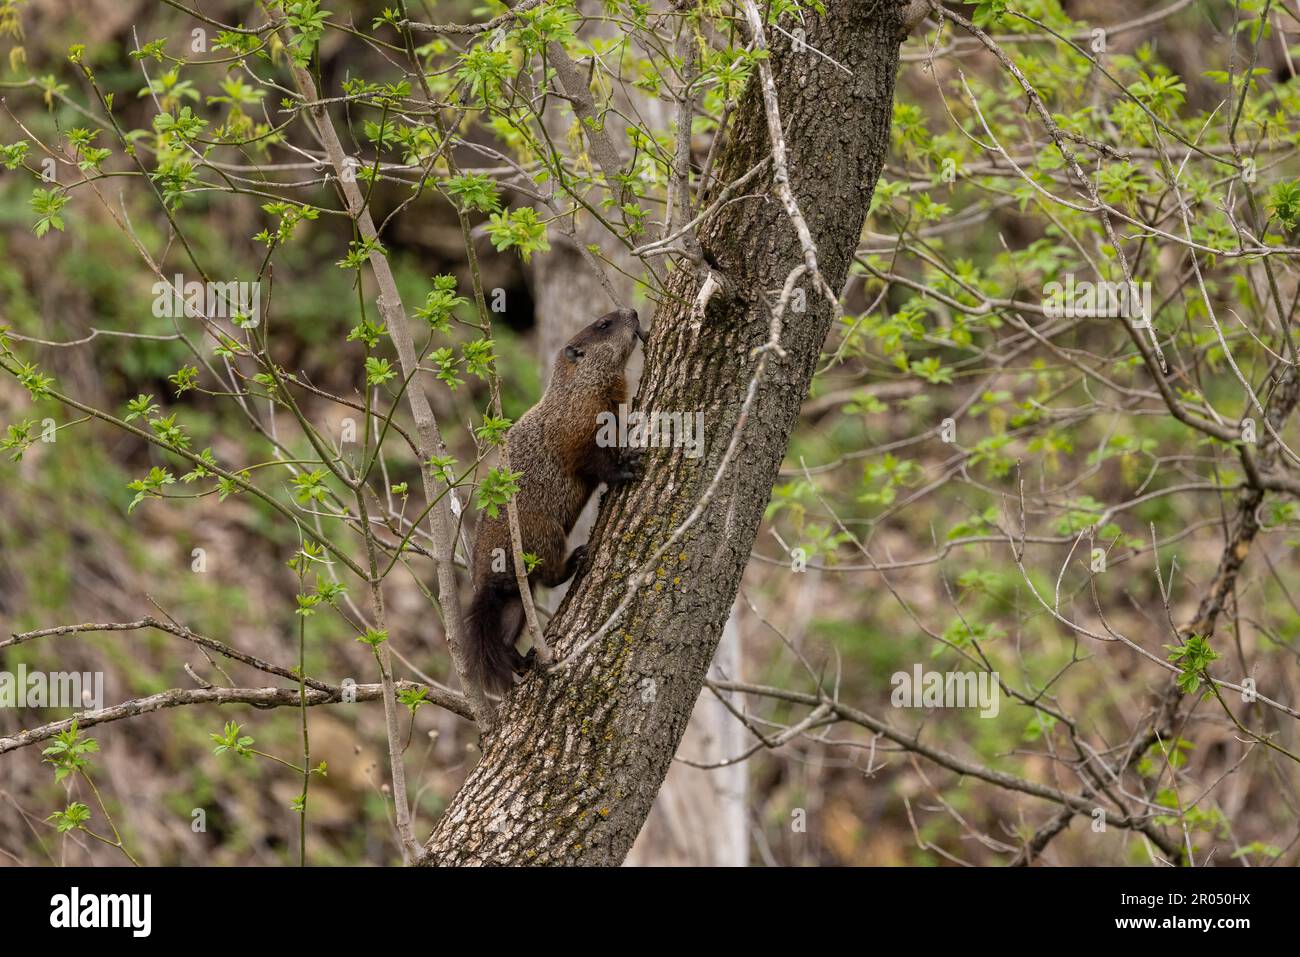 A woodchuck in a tree in the woods during spring. Stock Photo